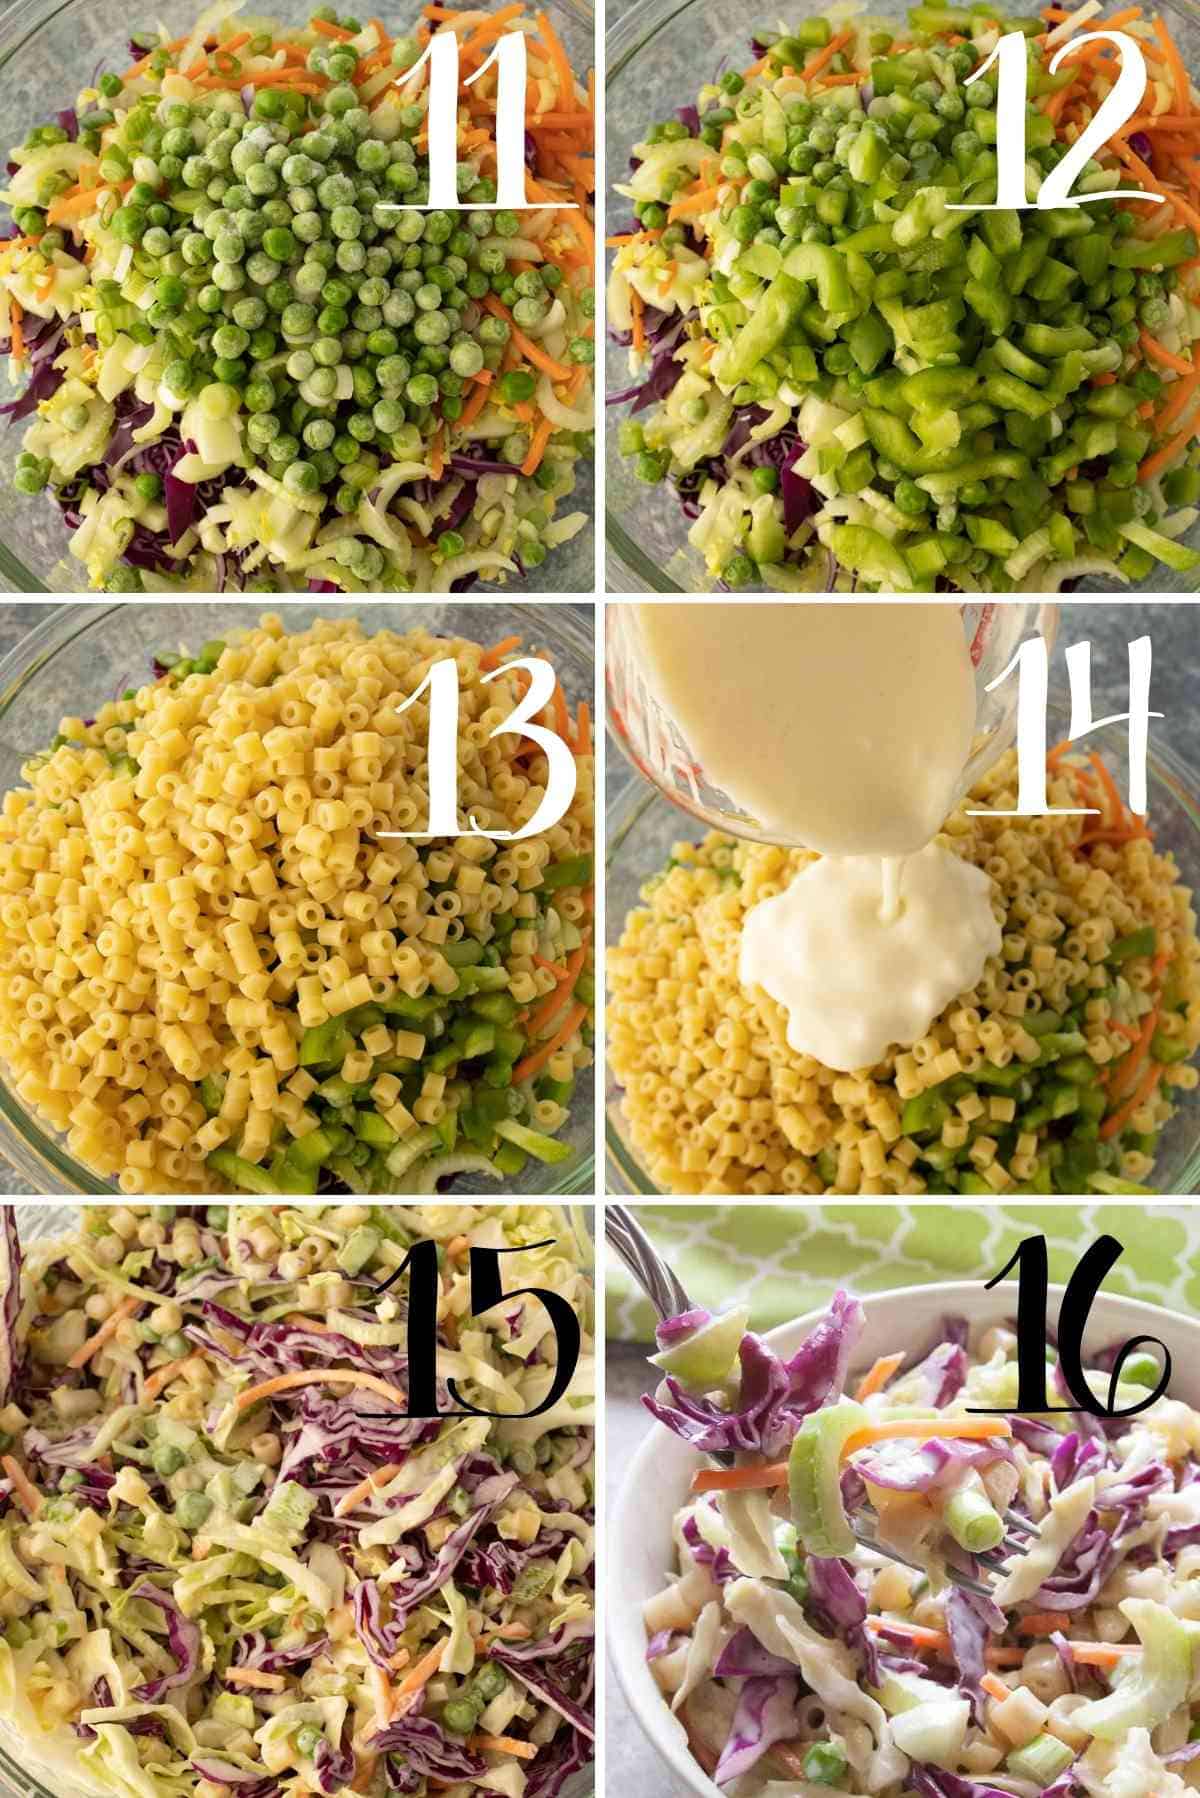 Mix in the pasta and creamy dressing!